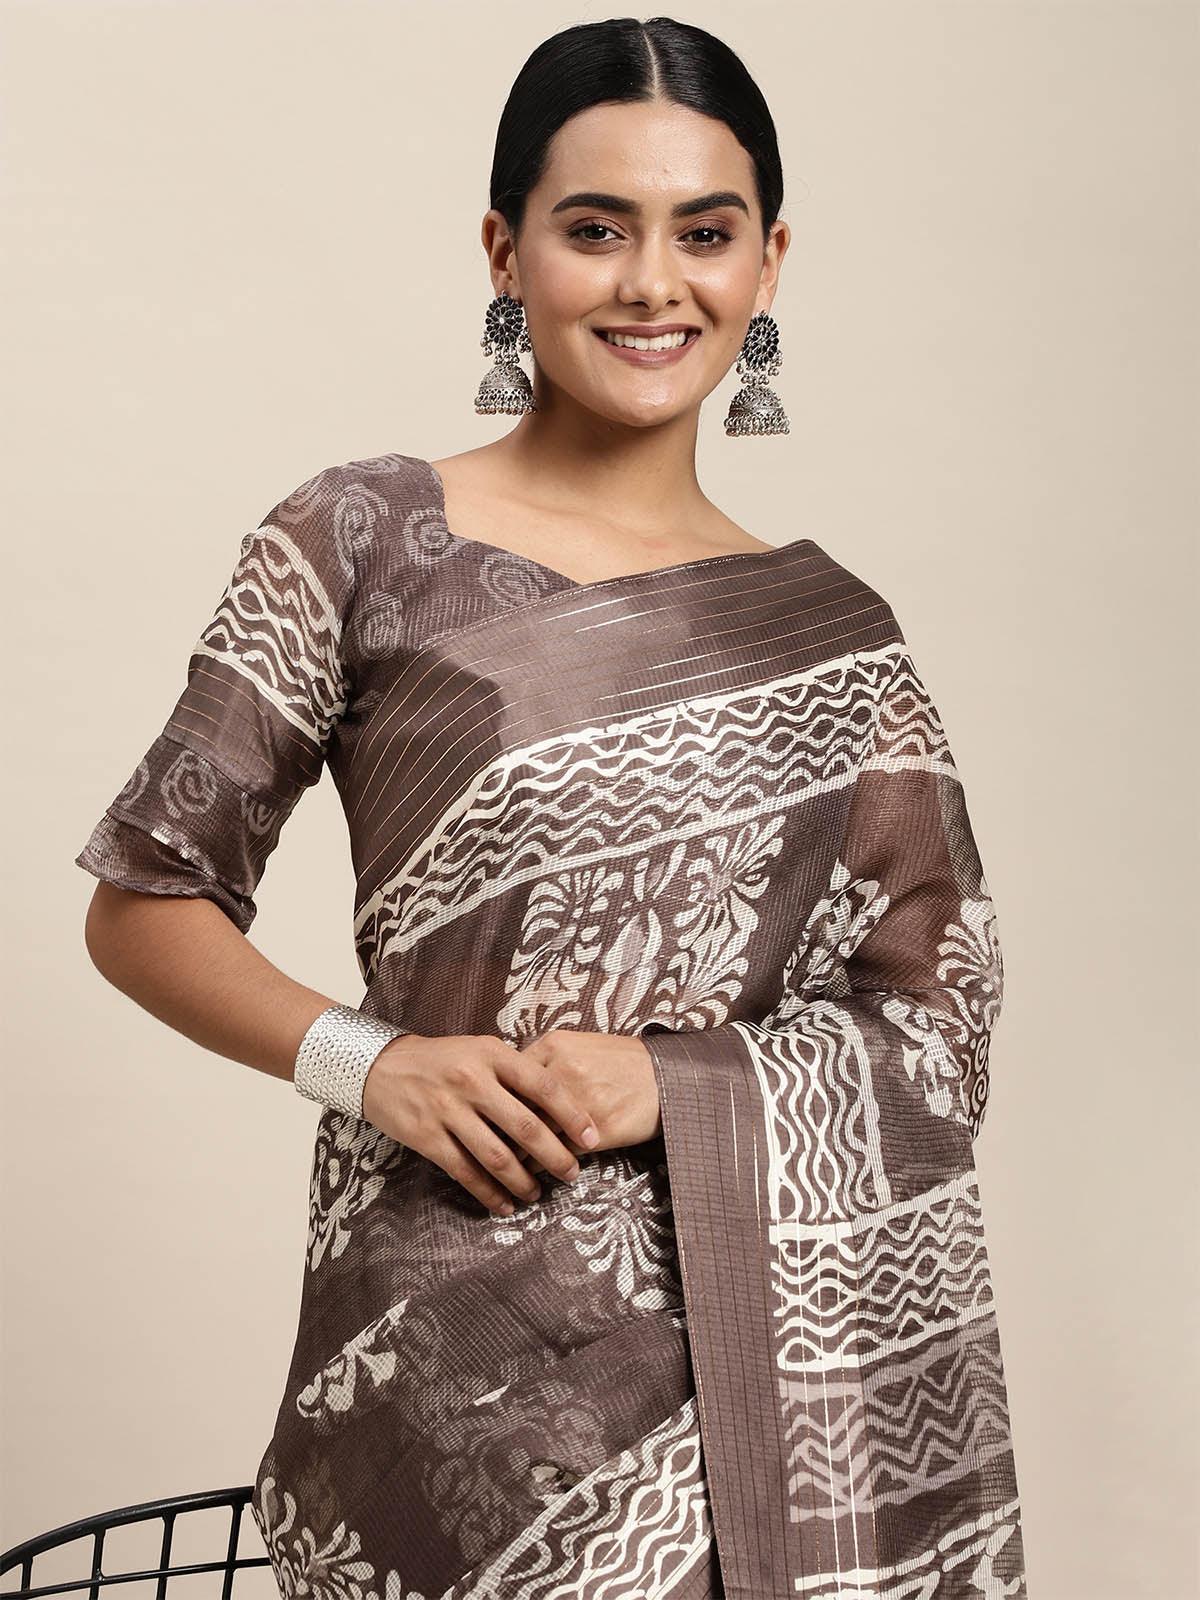 Women's Brasso Charcoal Grey Printed Designer Saree With Blouse Piece - Odette